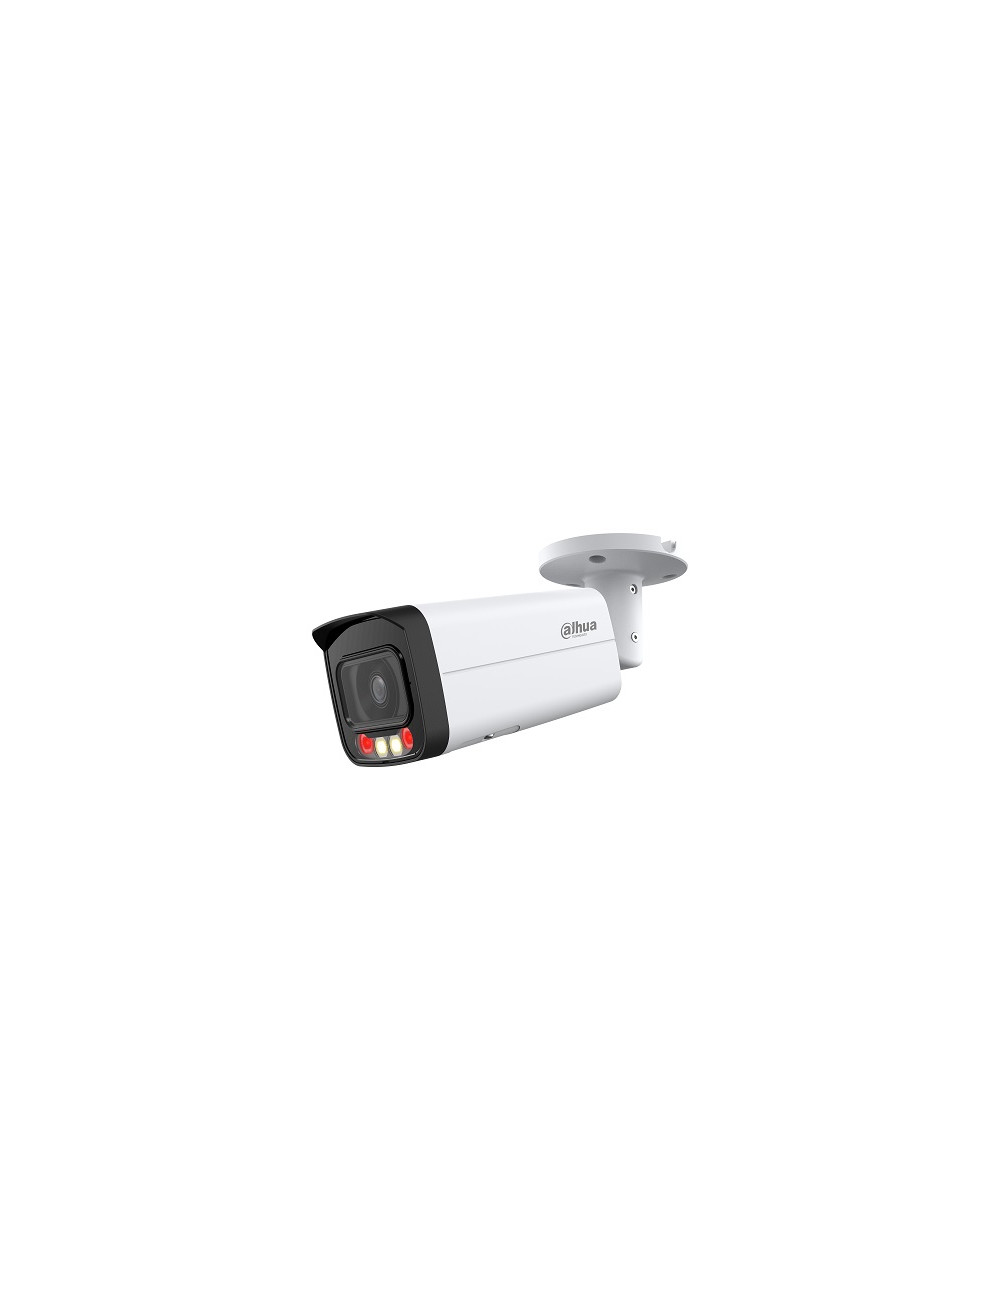 4K IP Network Camera 8MP HFW2849T-AS-IL 3.6mm